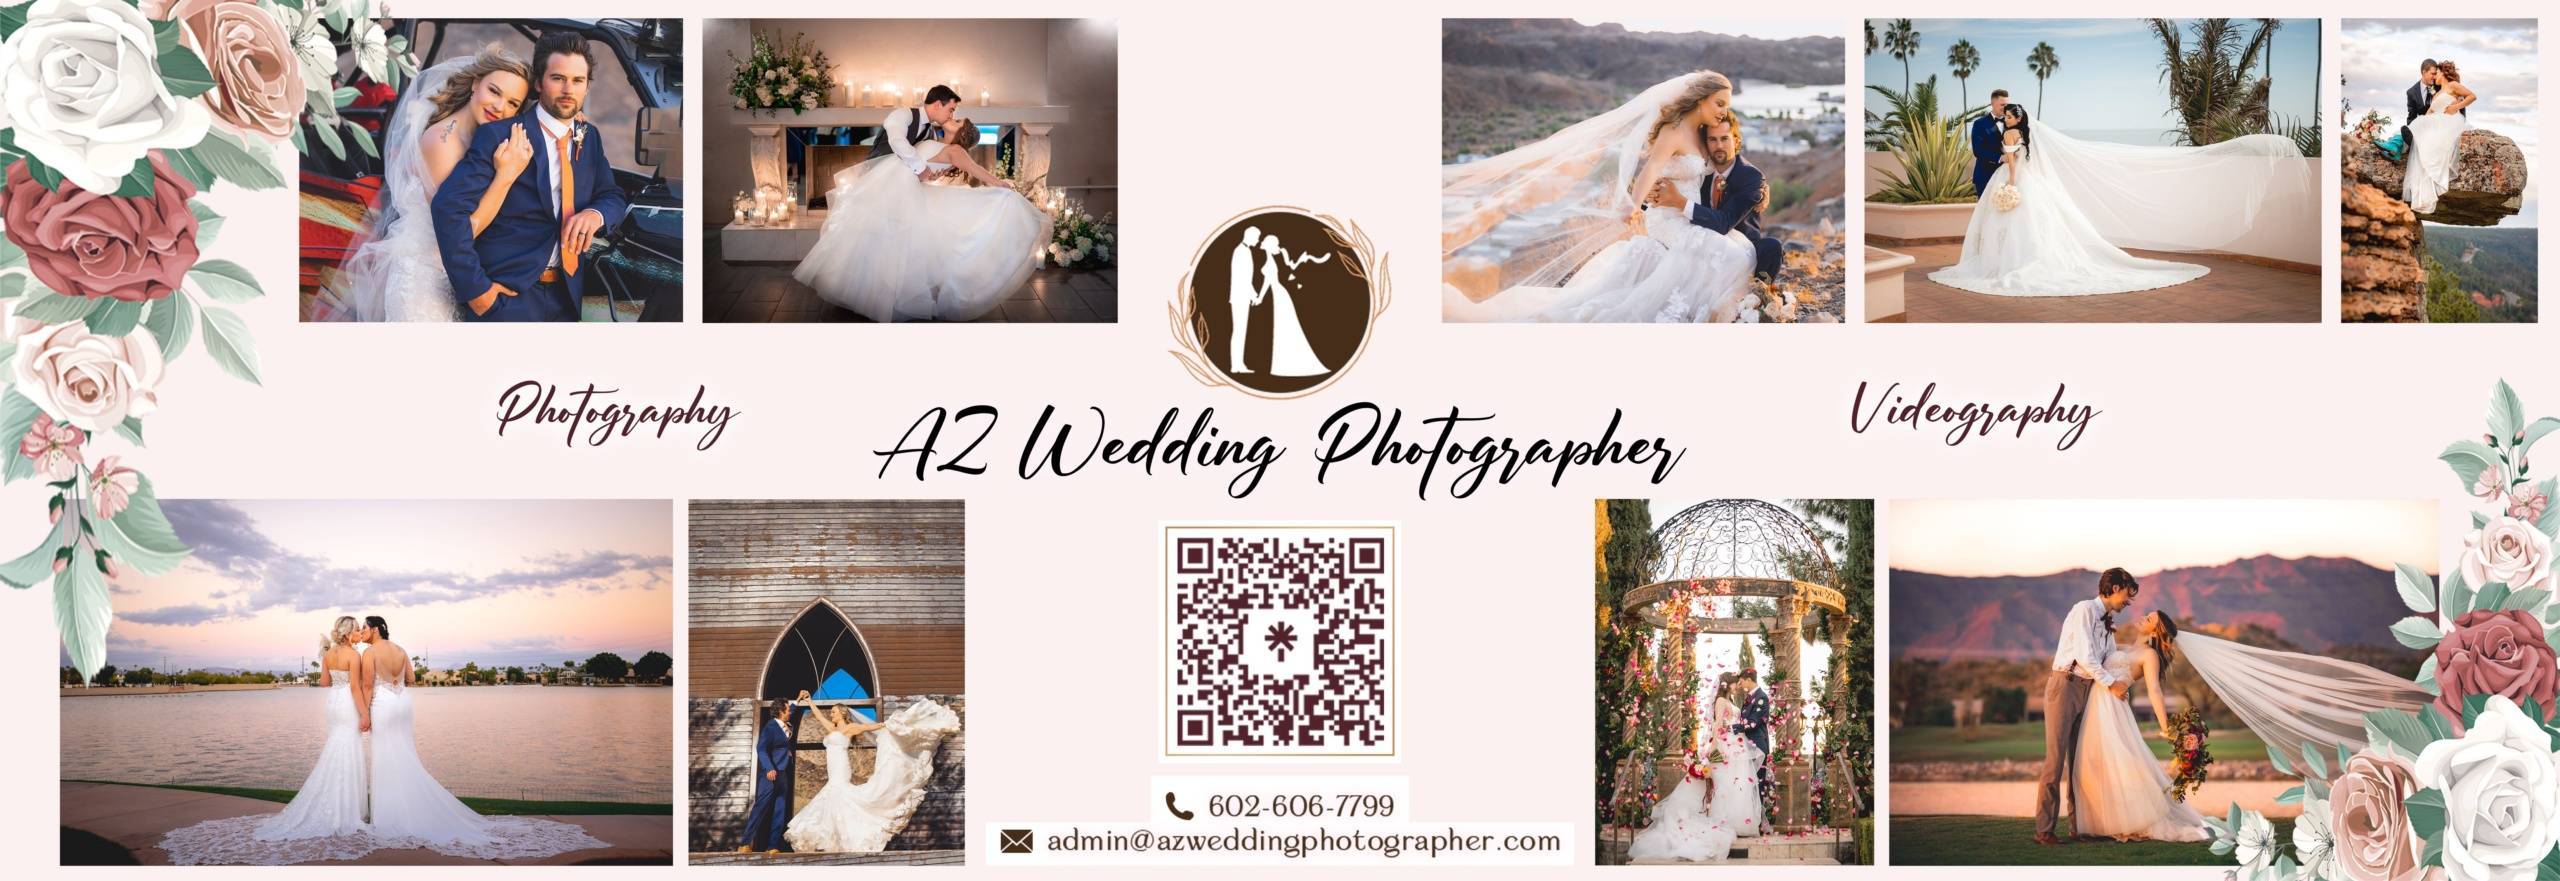 Collage of wedding couples, at different Wedding Venues with scenic Arizona backdrops for Photography and Videography services offered by AZ Wedding Photographer.